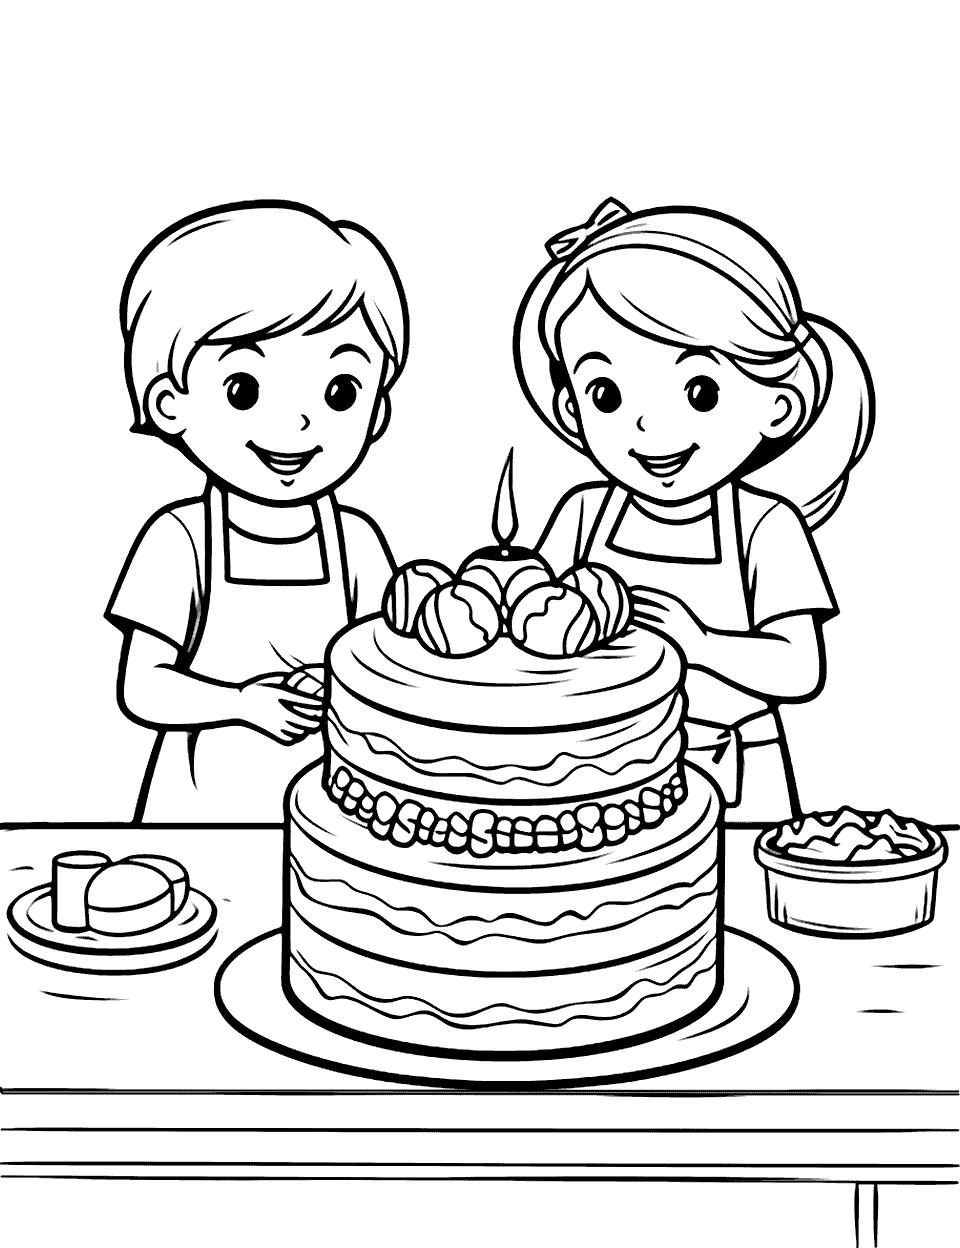 Baking Fun Cake Coloring Page - Children baking and decorating a cake in a kitchen.